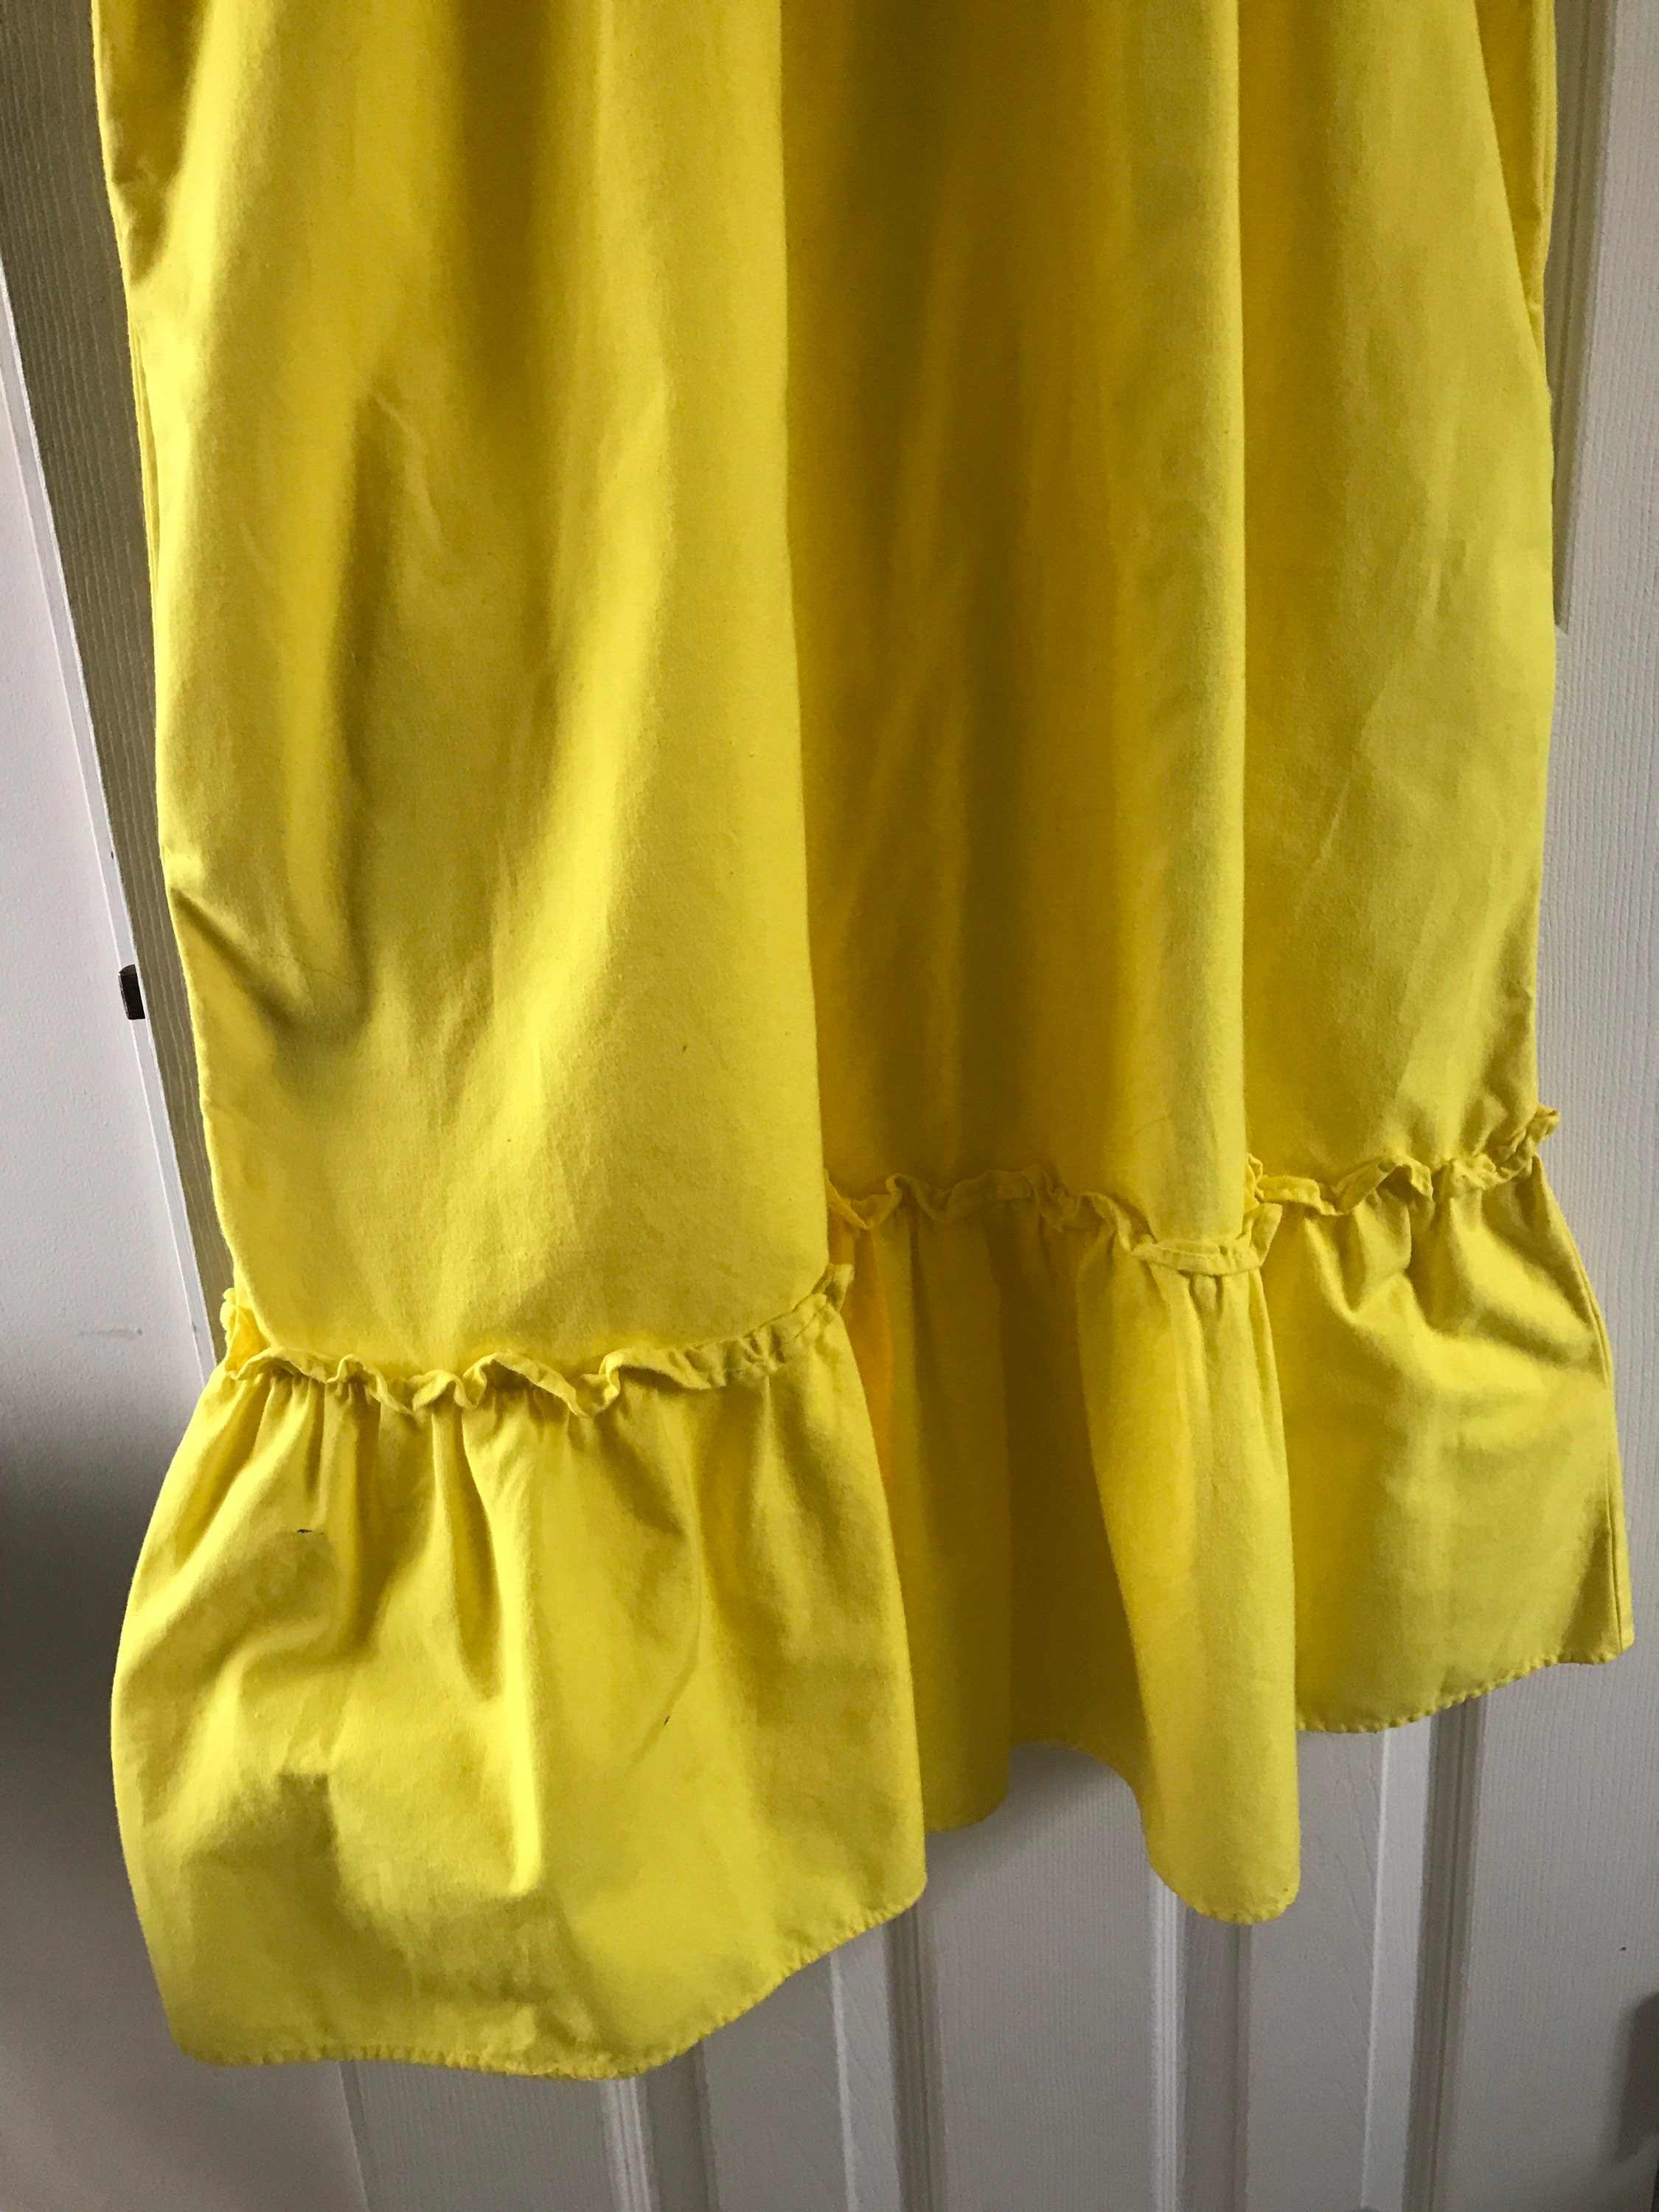 Vtg Handmade Bright Yellow Dress Made in Tlaquepaque Mexico - Etsy